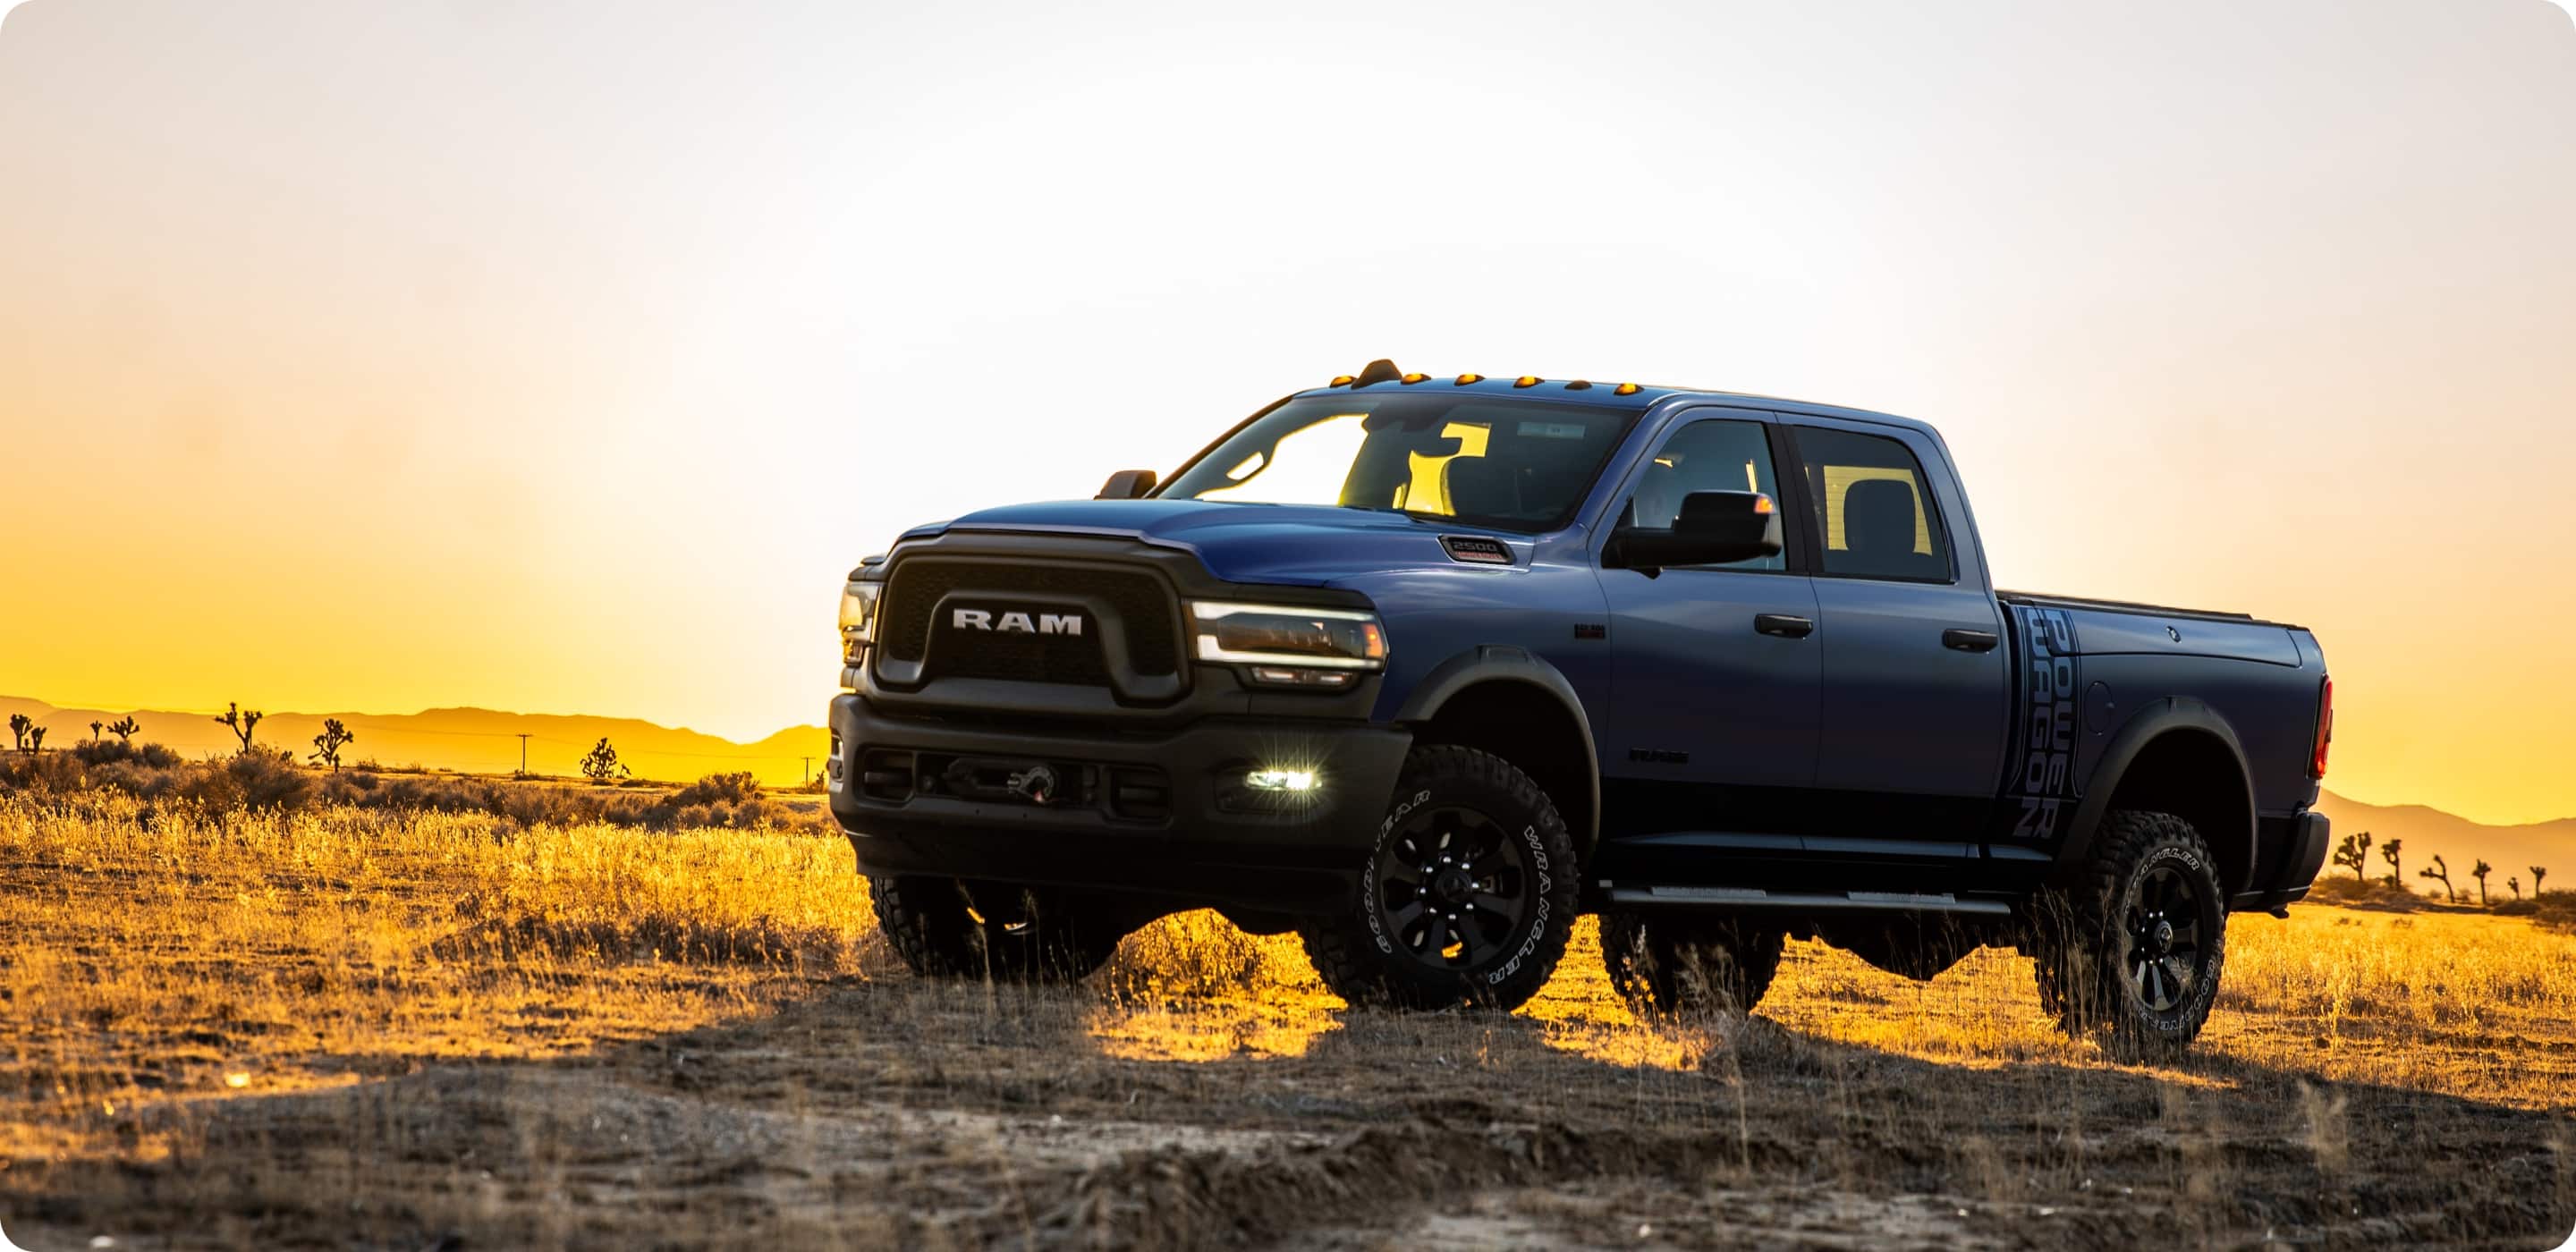 Display A 2021 Ram 2500 Power Wagon parked on a field that is bathed in golden light at sunset.